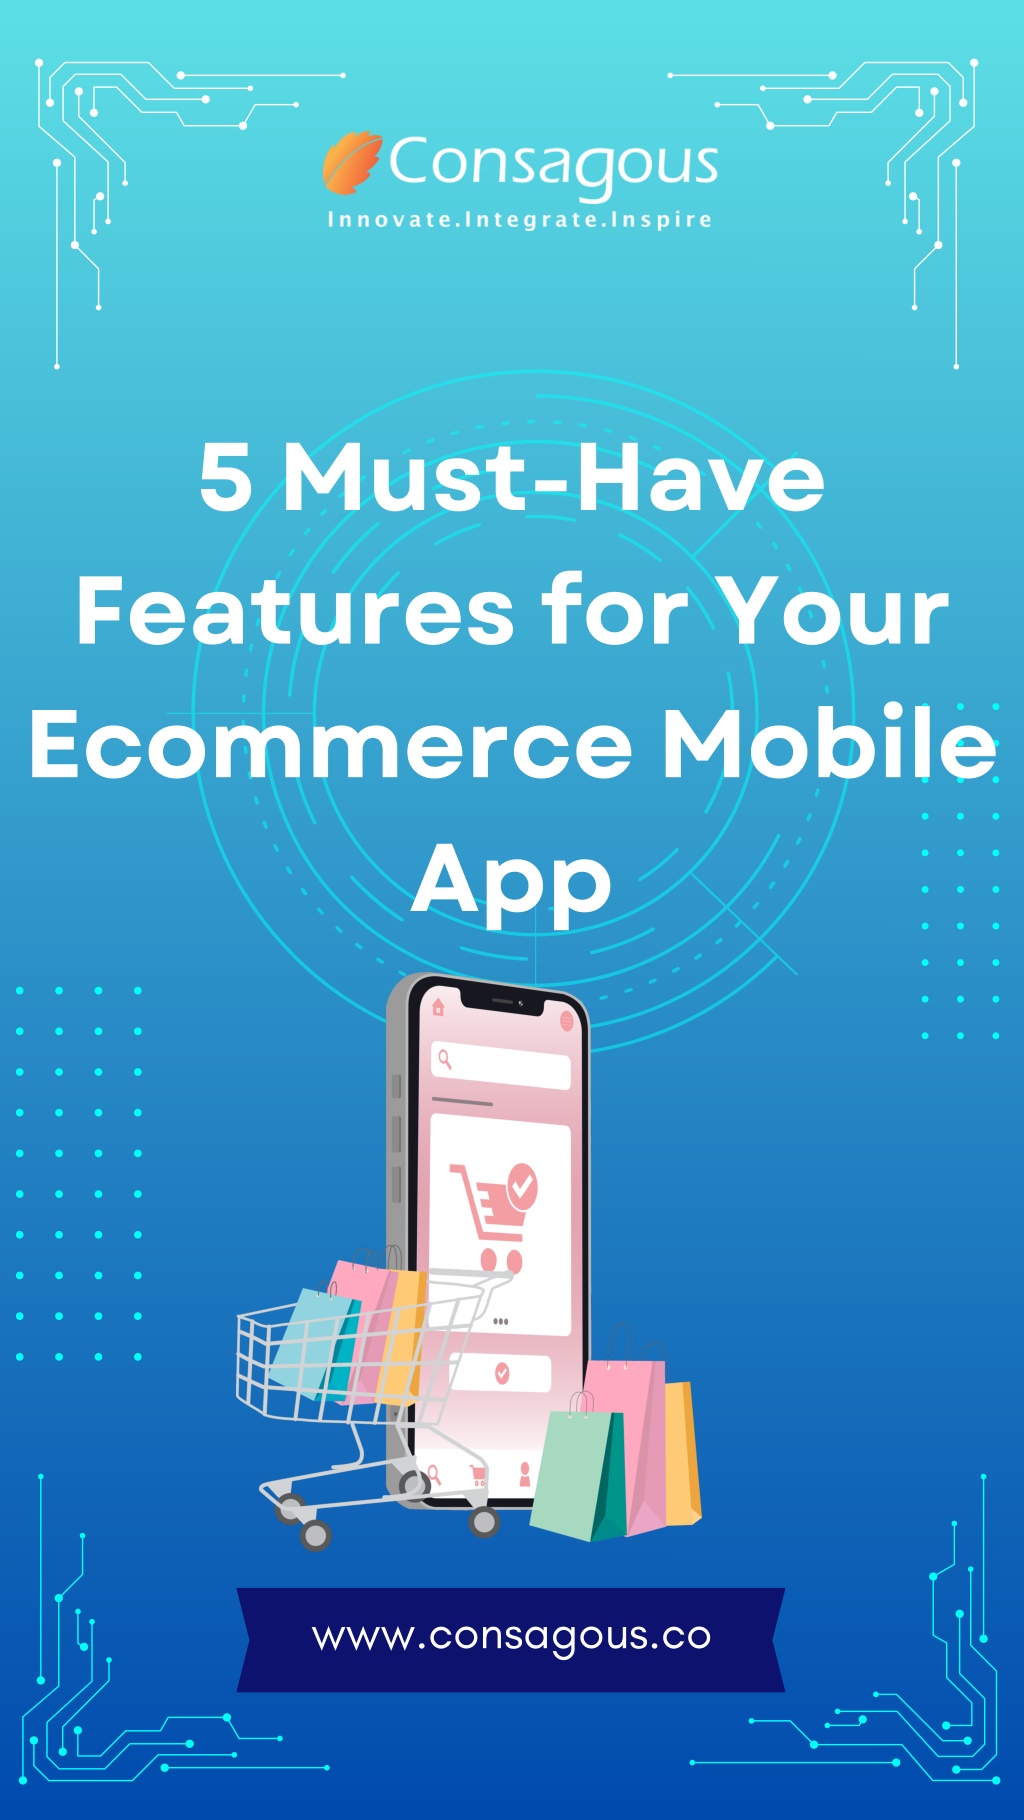 5 must have features for your ecommerce mobile app l.w